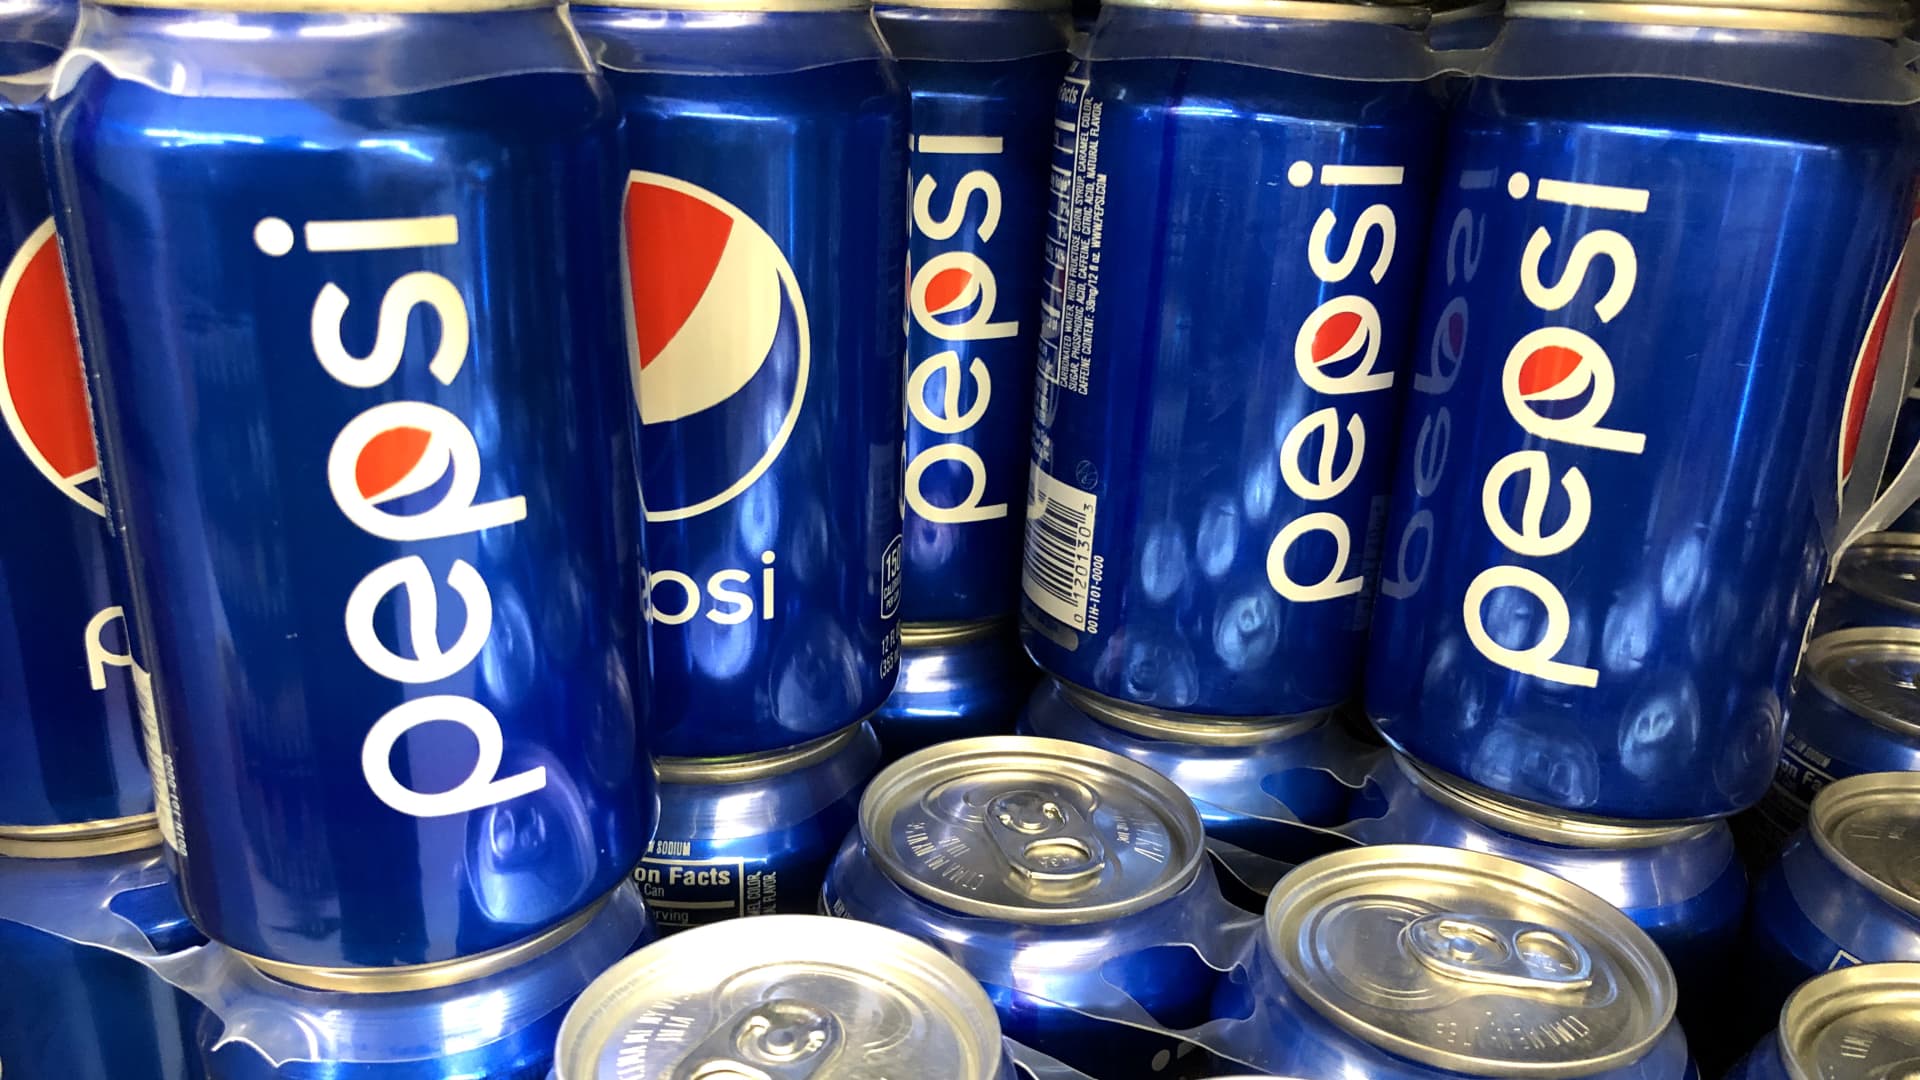 PepsiCo plans to cut hundreds of jobs, report says